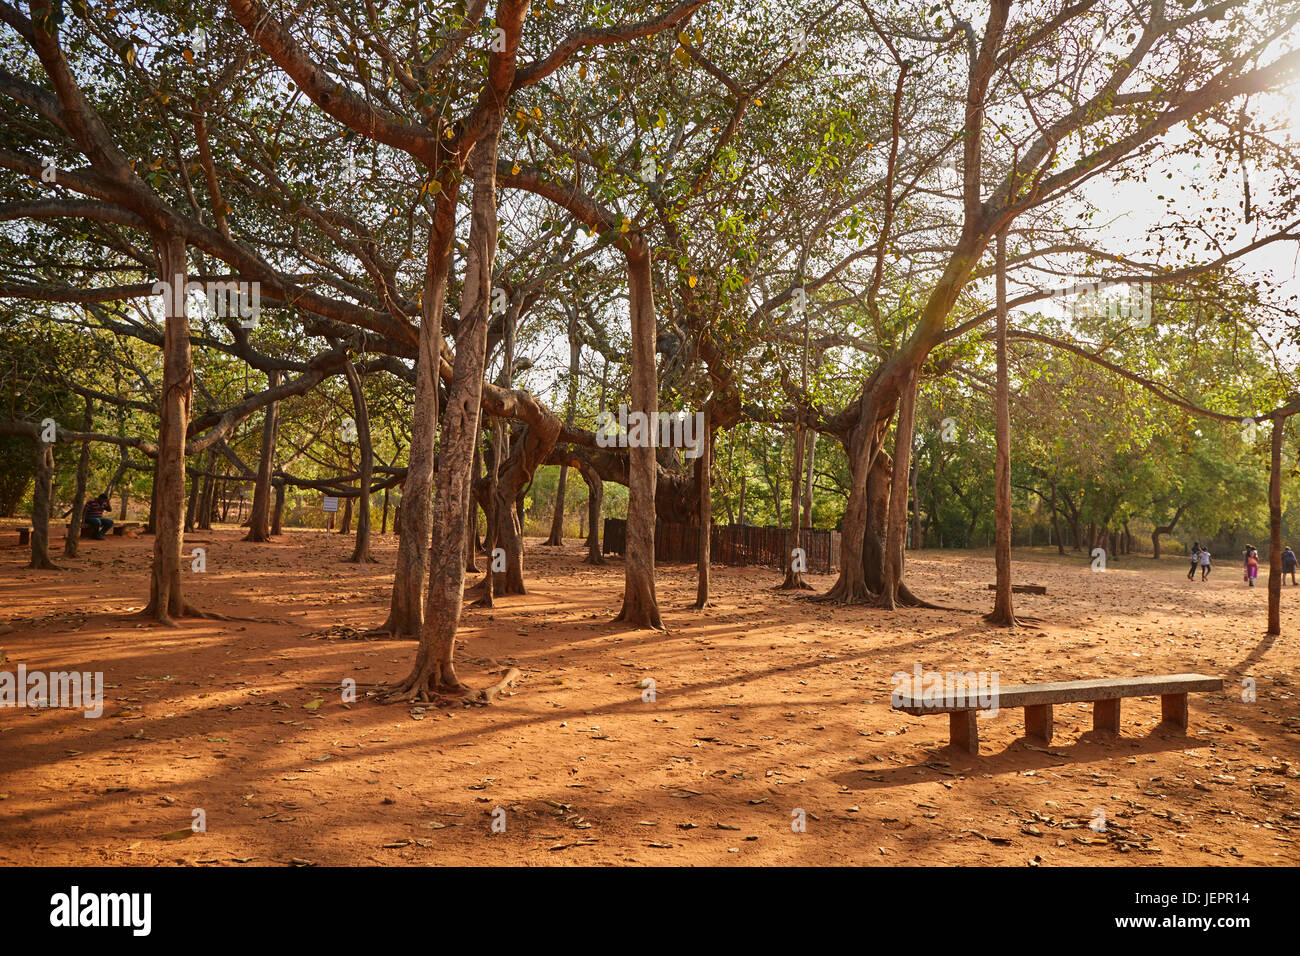 famous big mother banyan tree in Auroville, India Stock Photo